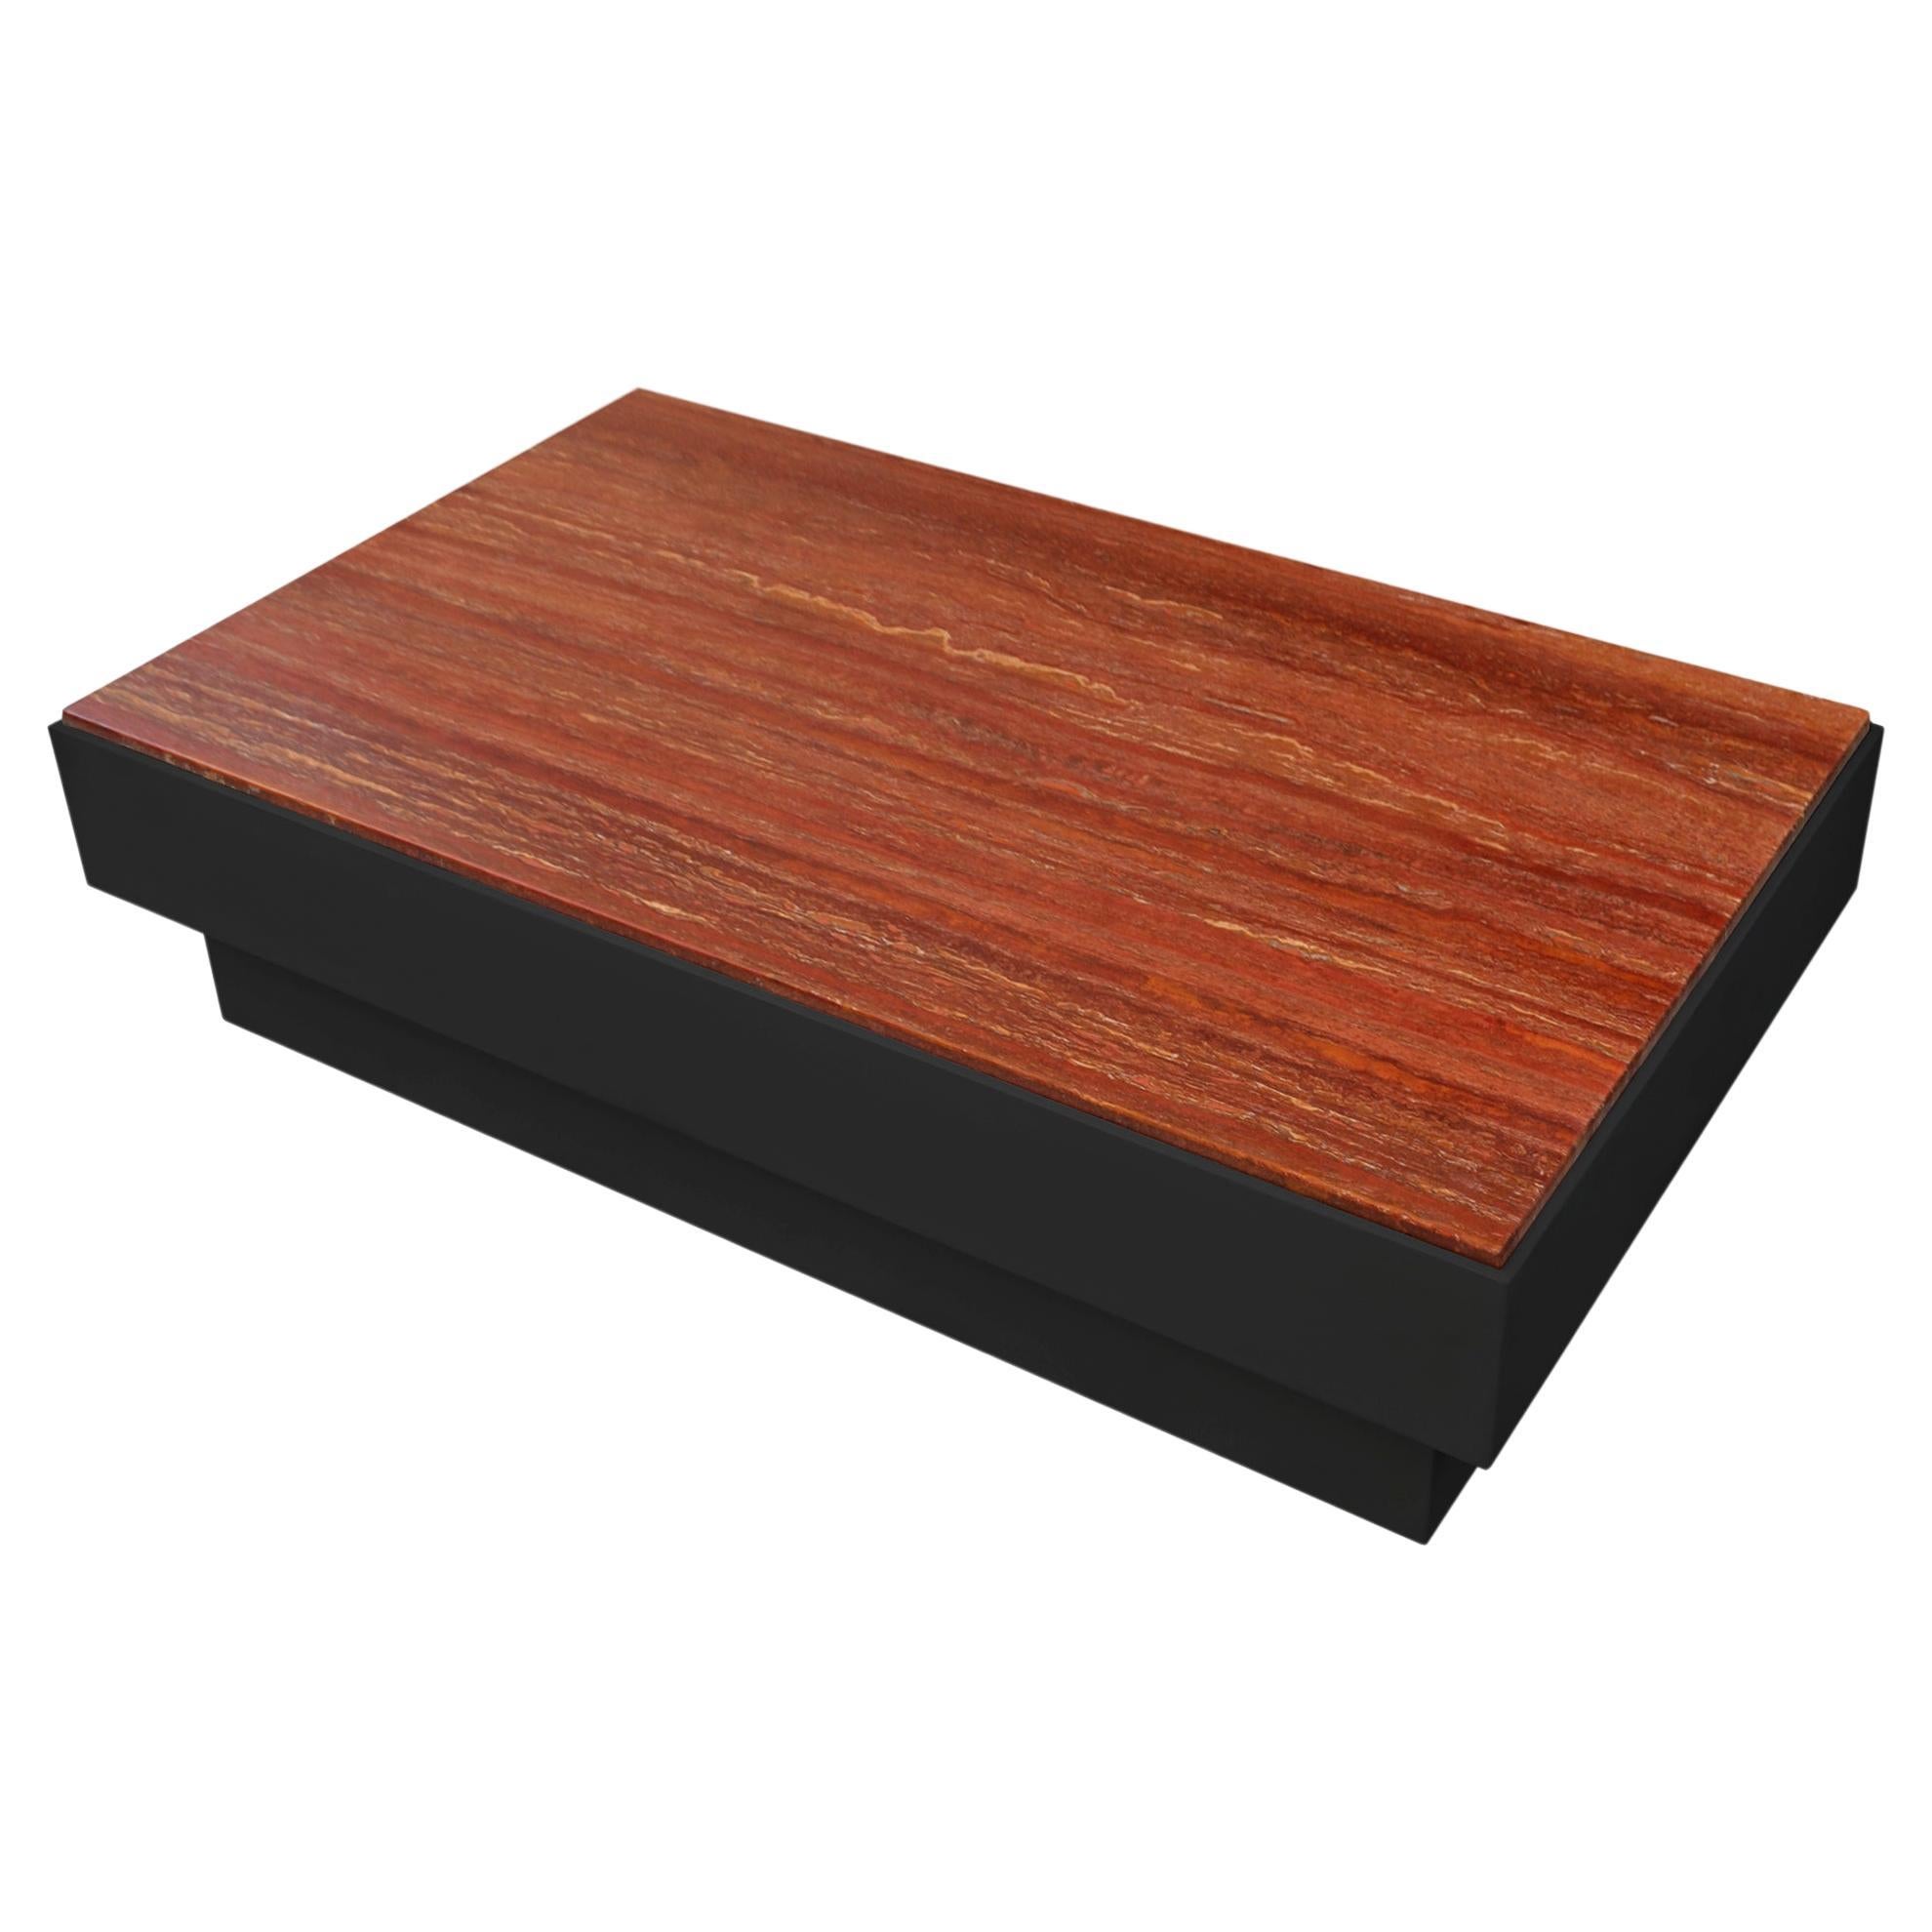 Coffee table red travertine and black wooden base handmade in Italy by Cupioli